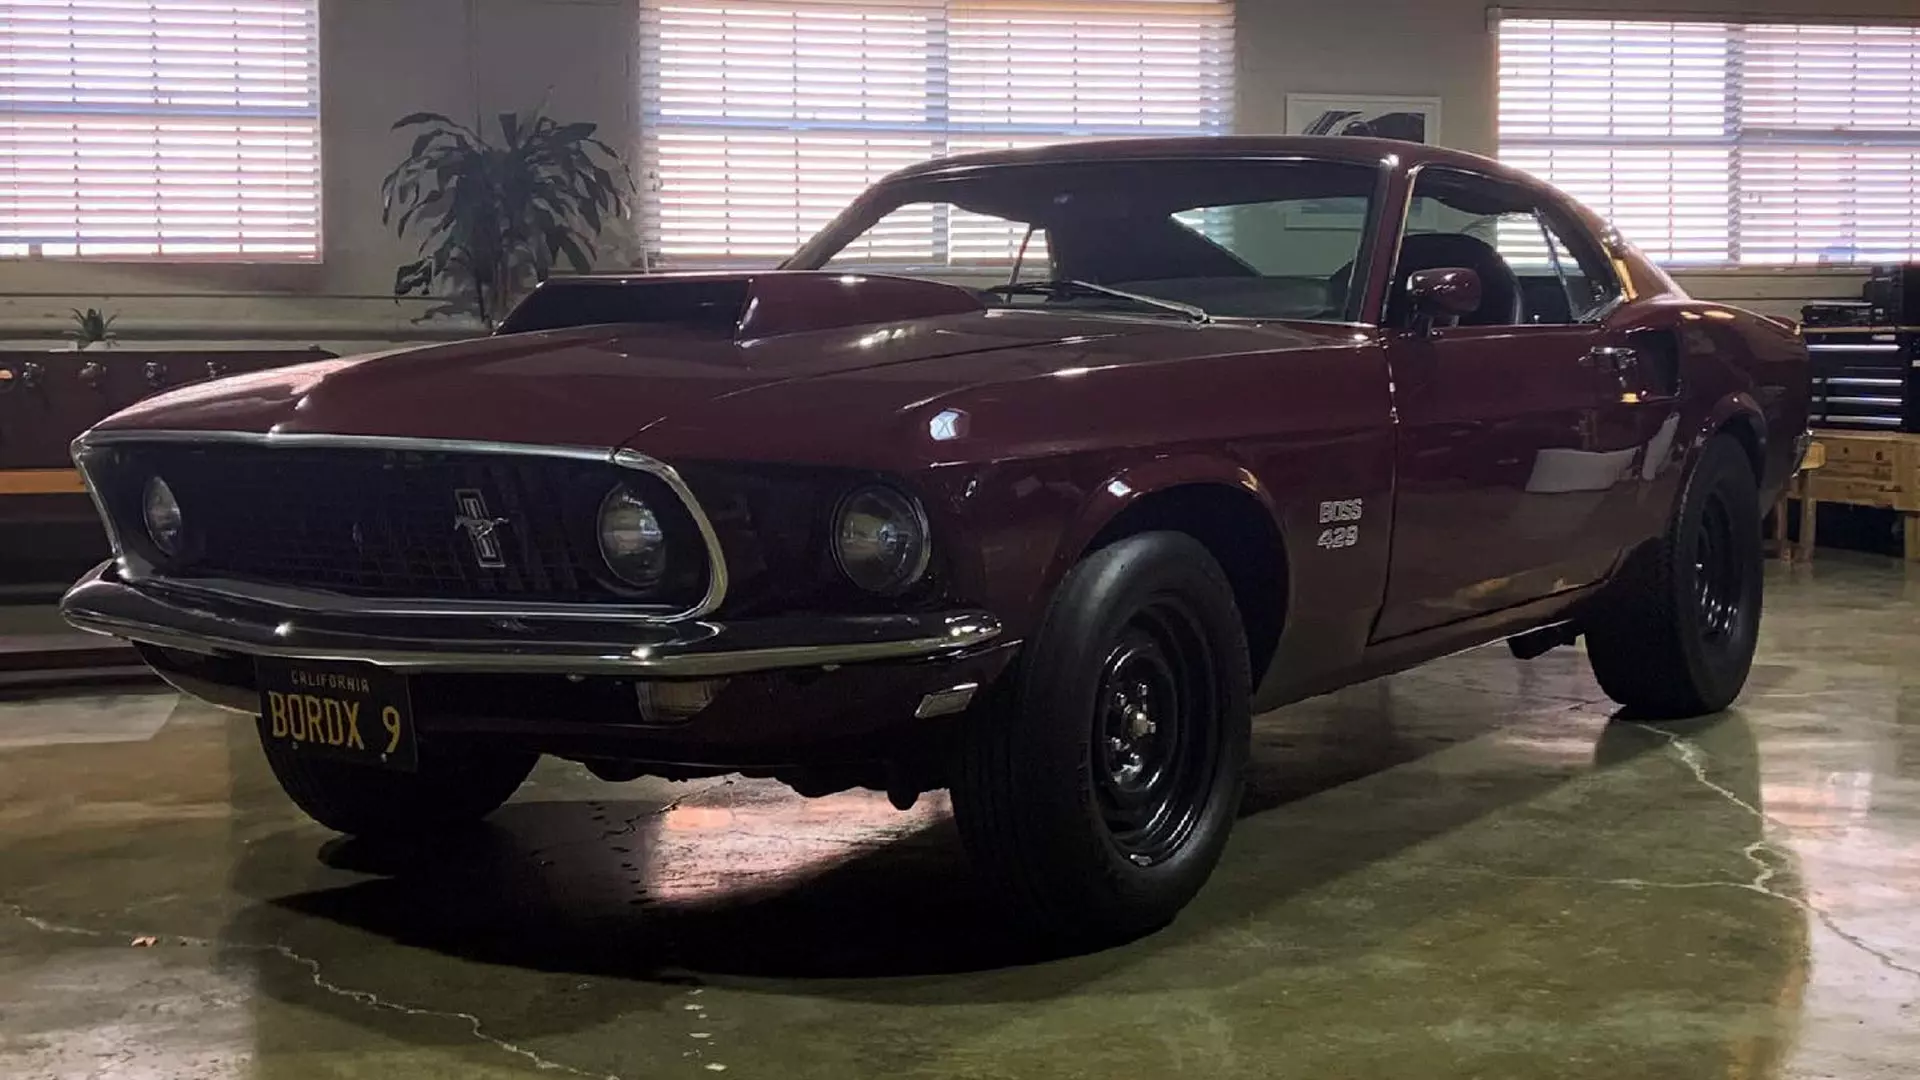 I Really Love the Subtle Rage of This 1969 Burgundy Mustang | Autance